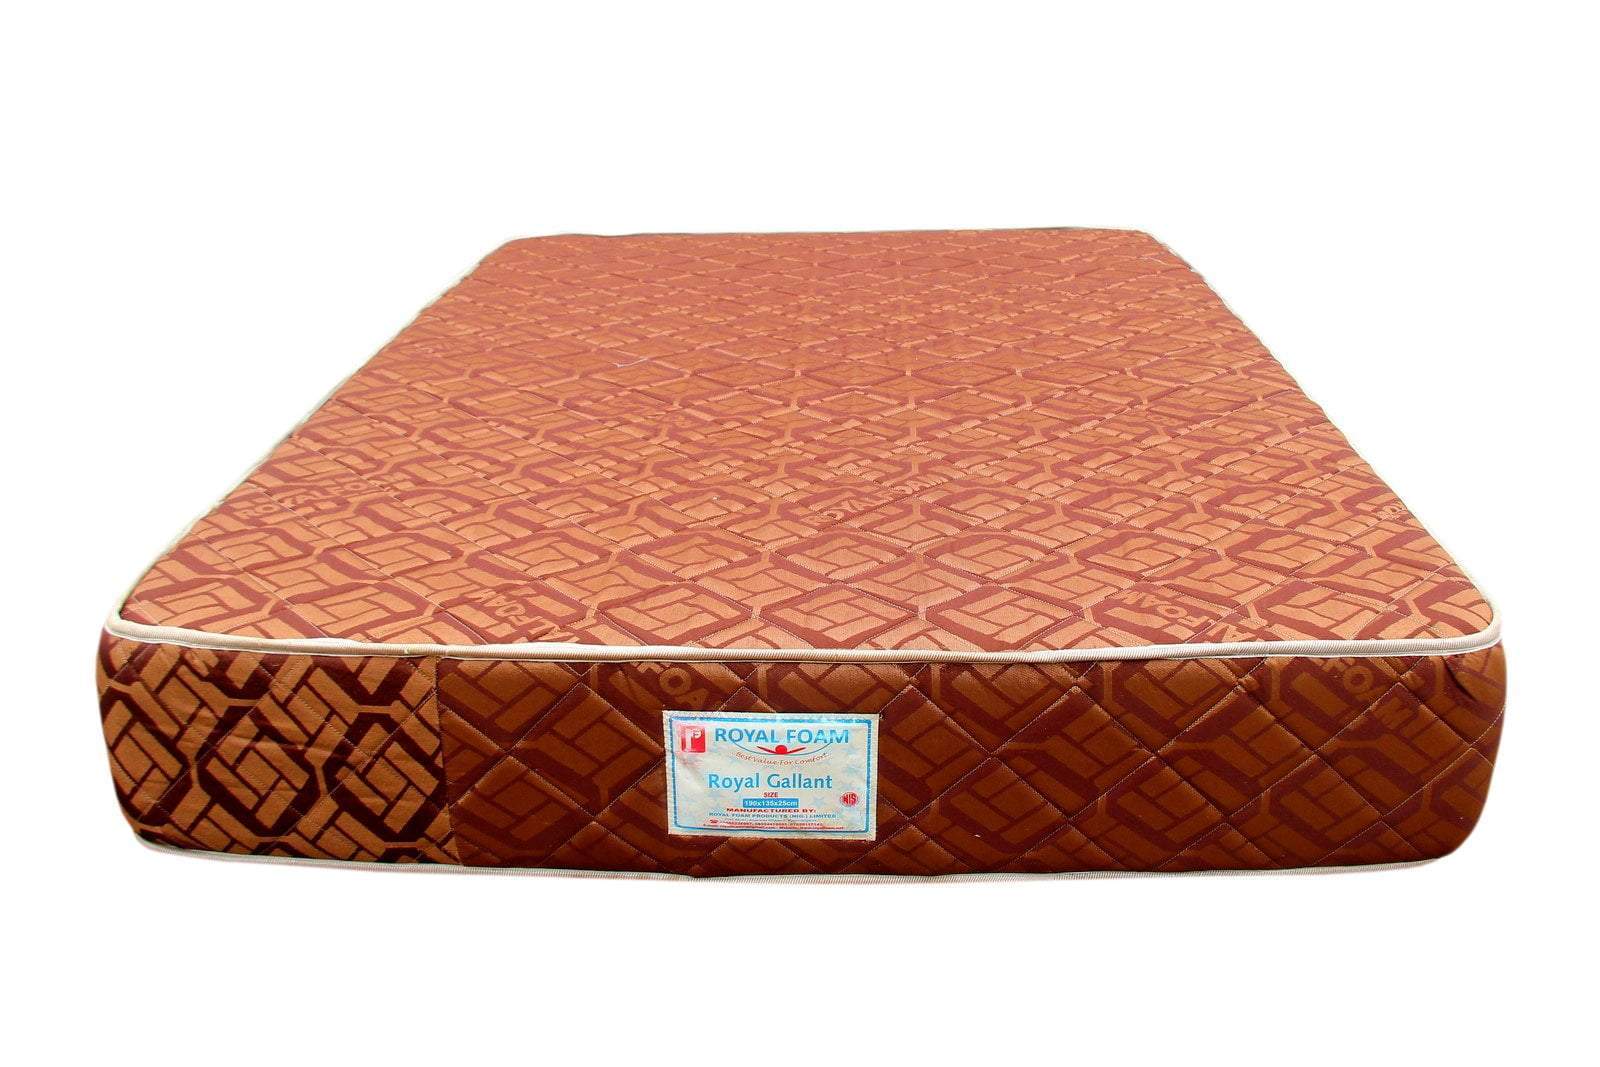 Royal Gallant JACQUARD fabric-Fully Quilted Mattress 190 X 210 X 40 CM(6ft x 7ft x 16inches) 2 Adult(Lagos Only)